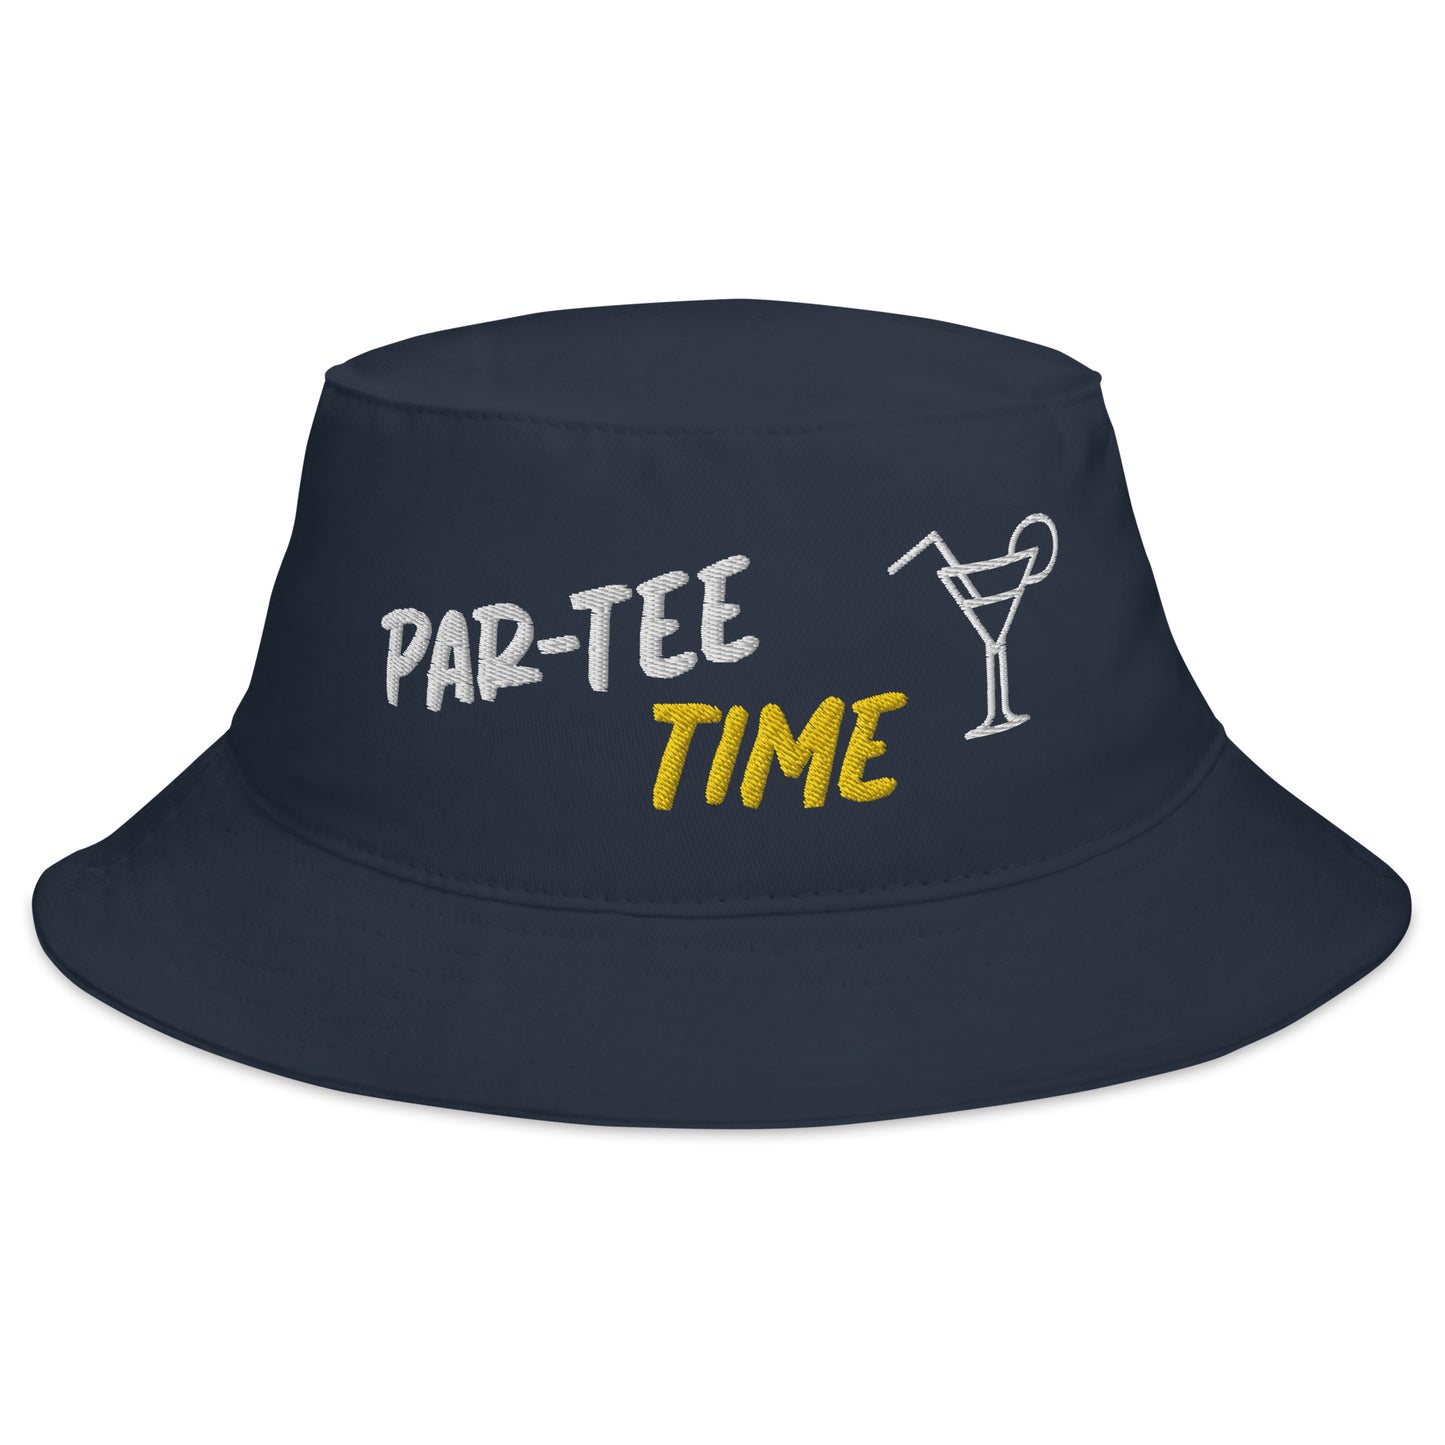 Cocktail "Par-Tee Time" in White & Gold - Bucket Hat